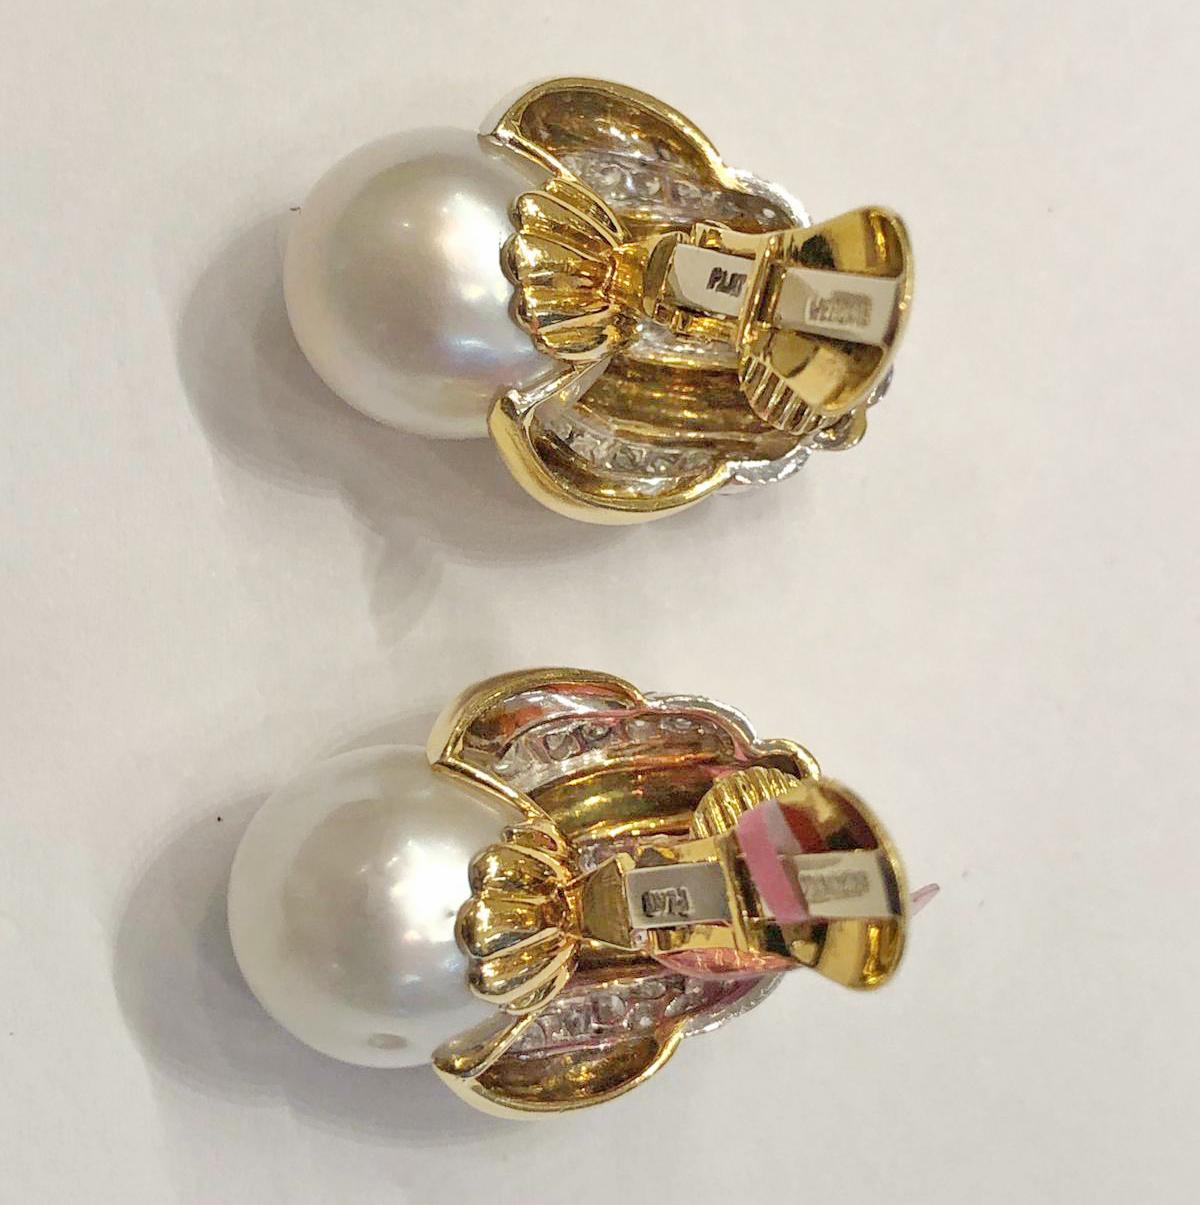 Stunning 1980s fluted 18K gold surmounts, with bands of circular-cut diamonds set in platinum, the bottom with a large cultured pearl. 
The perfect earring that covers and says it all.
Circa 1980s. Signed David Webb